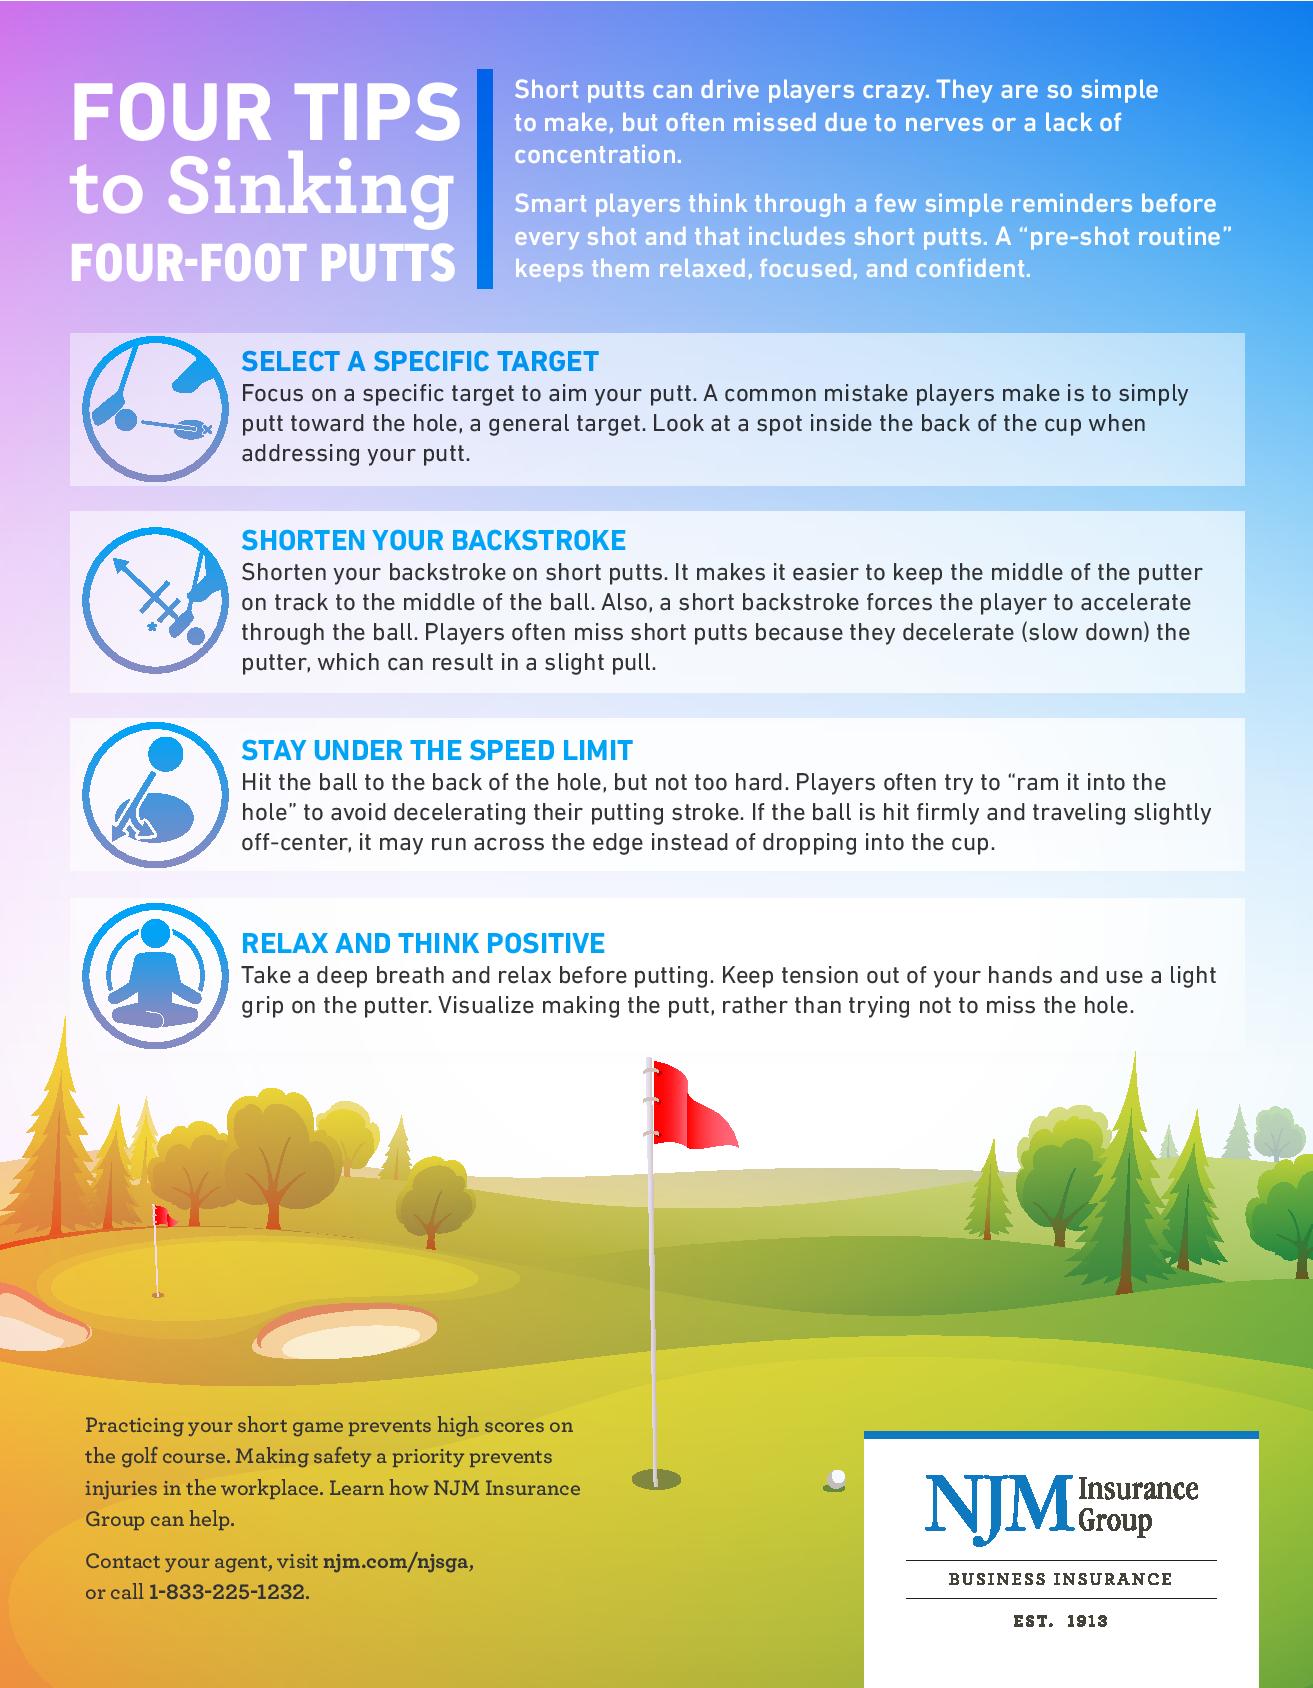 Four Tips to Sinking Four-Foot Putts